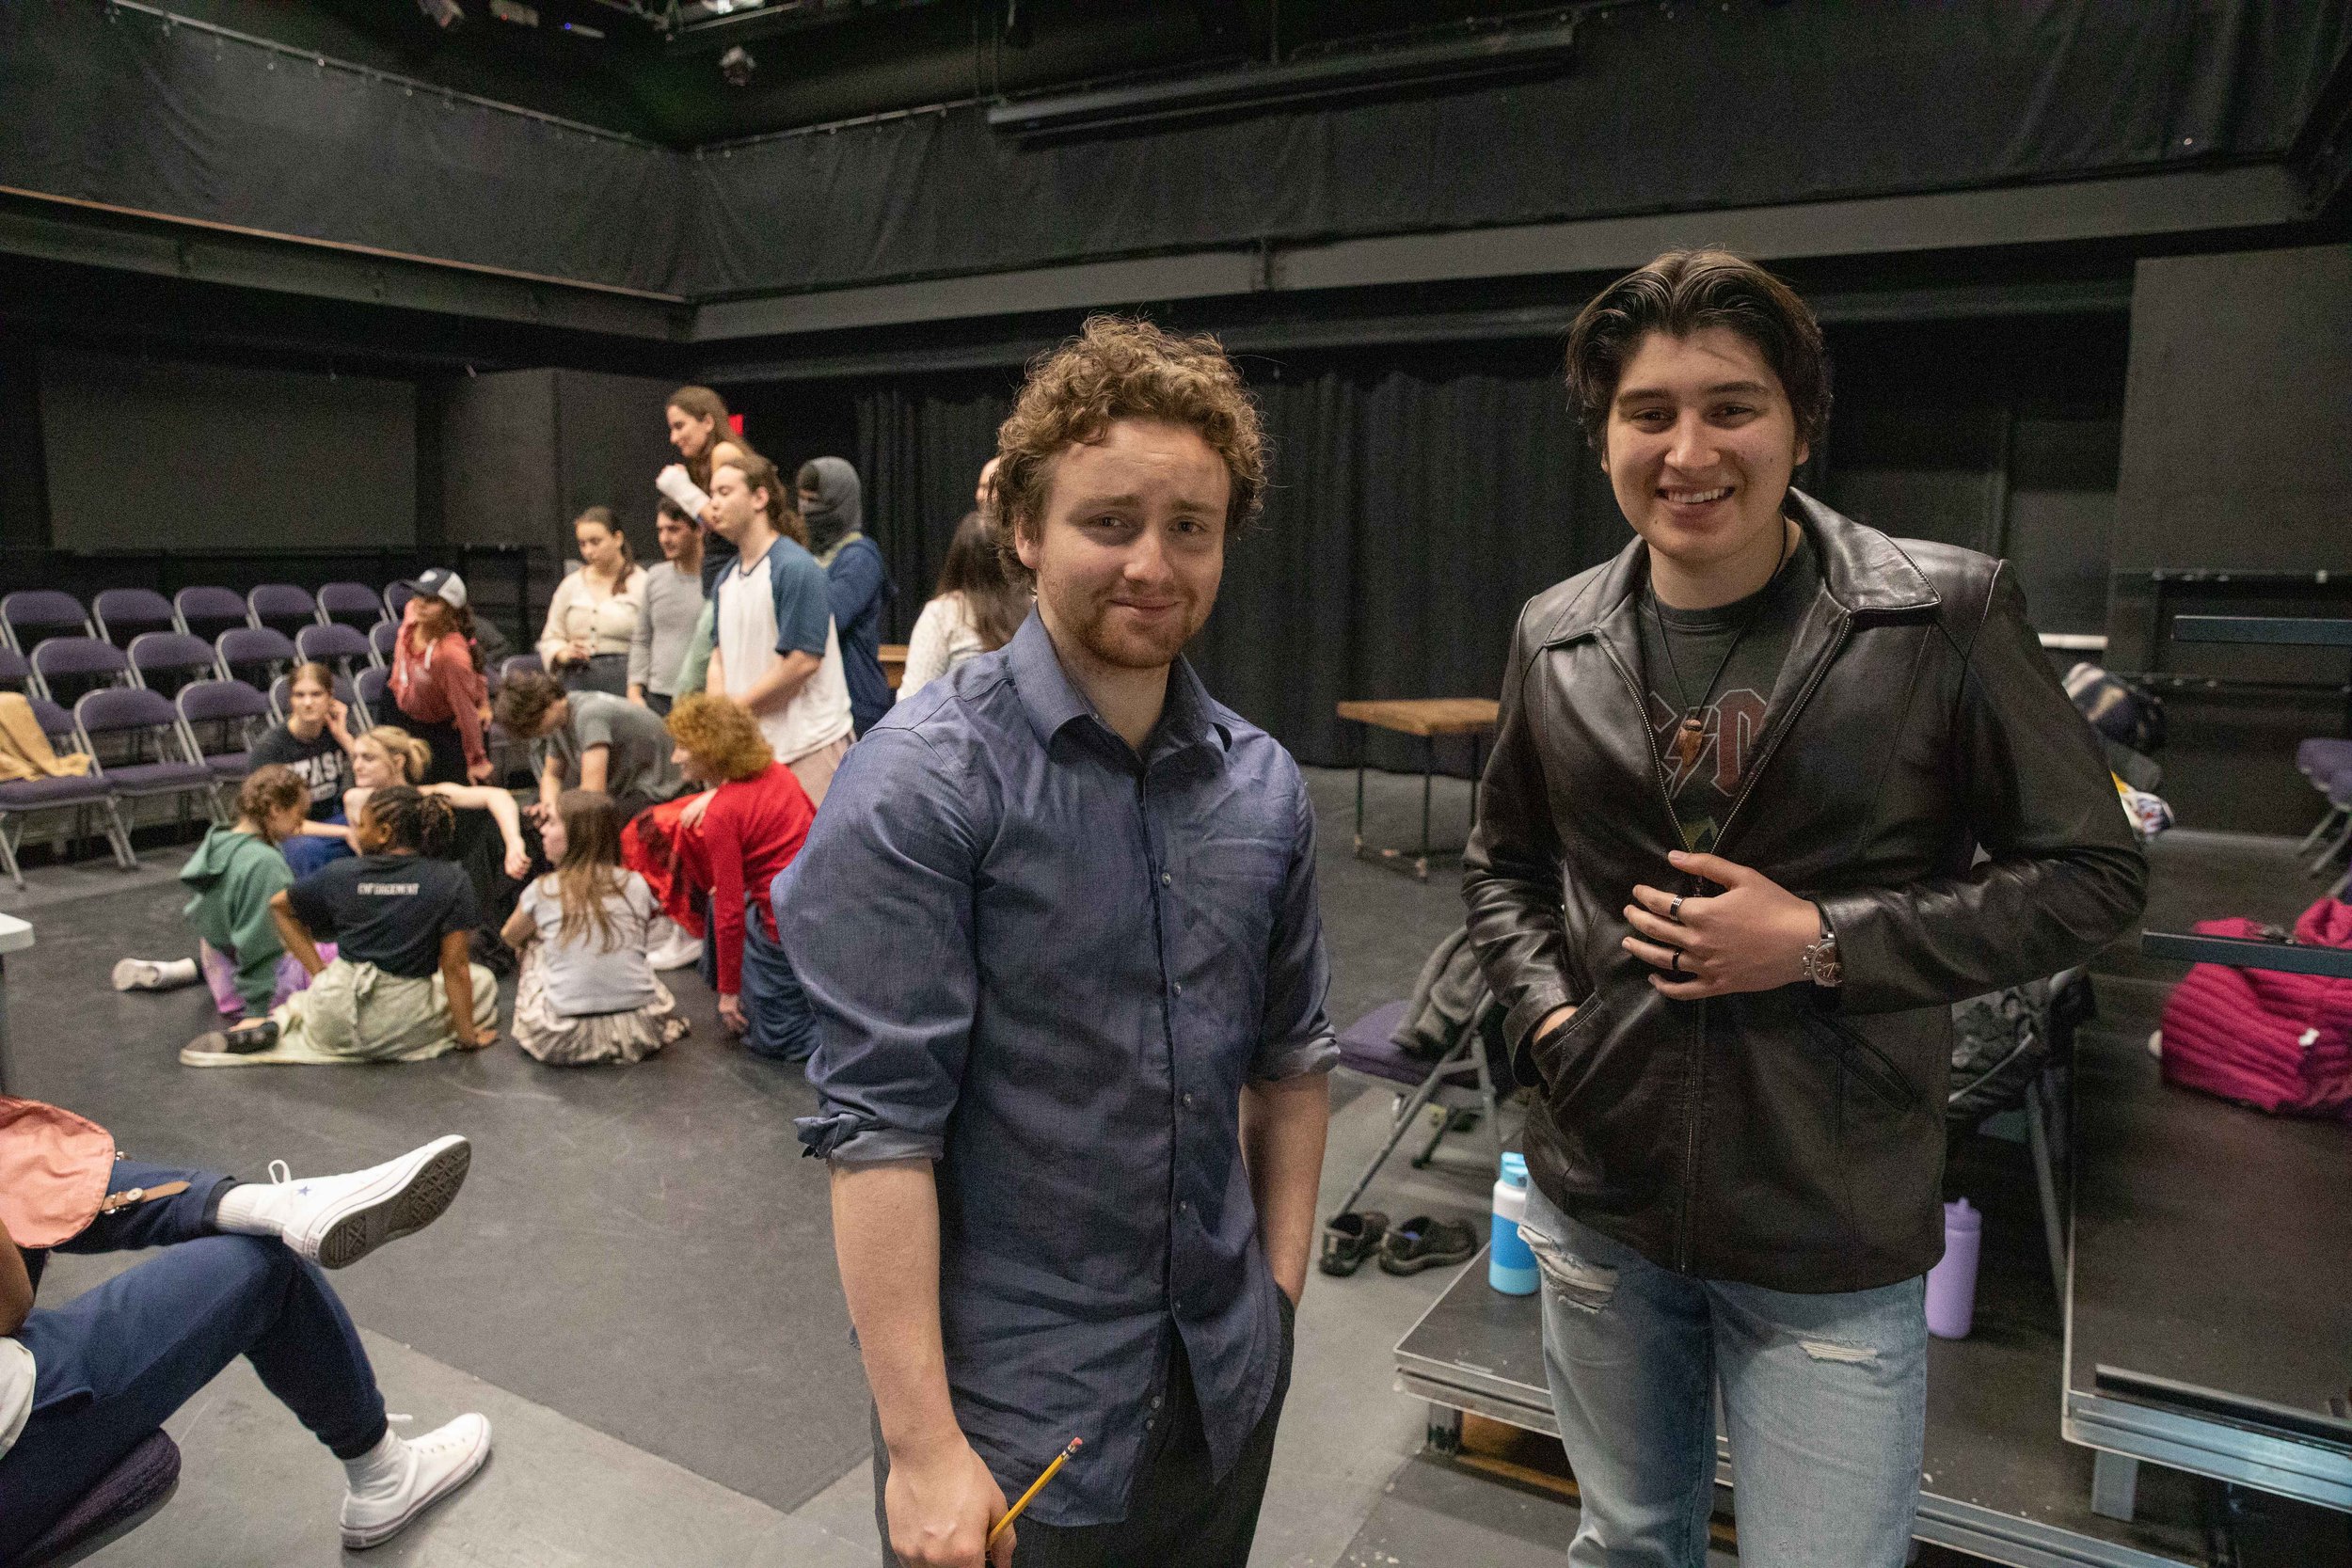  SMC students Elliot Moore (left) and Brayden Handwerger Bolívar (right) wait for their turn to perform at a class rehearsal for the musical “Hunchback of Notredame”. They both will play the role of Quasimodo alternating in the showings. Theater Arts